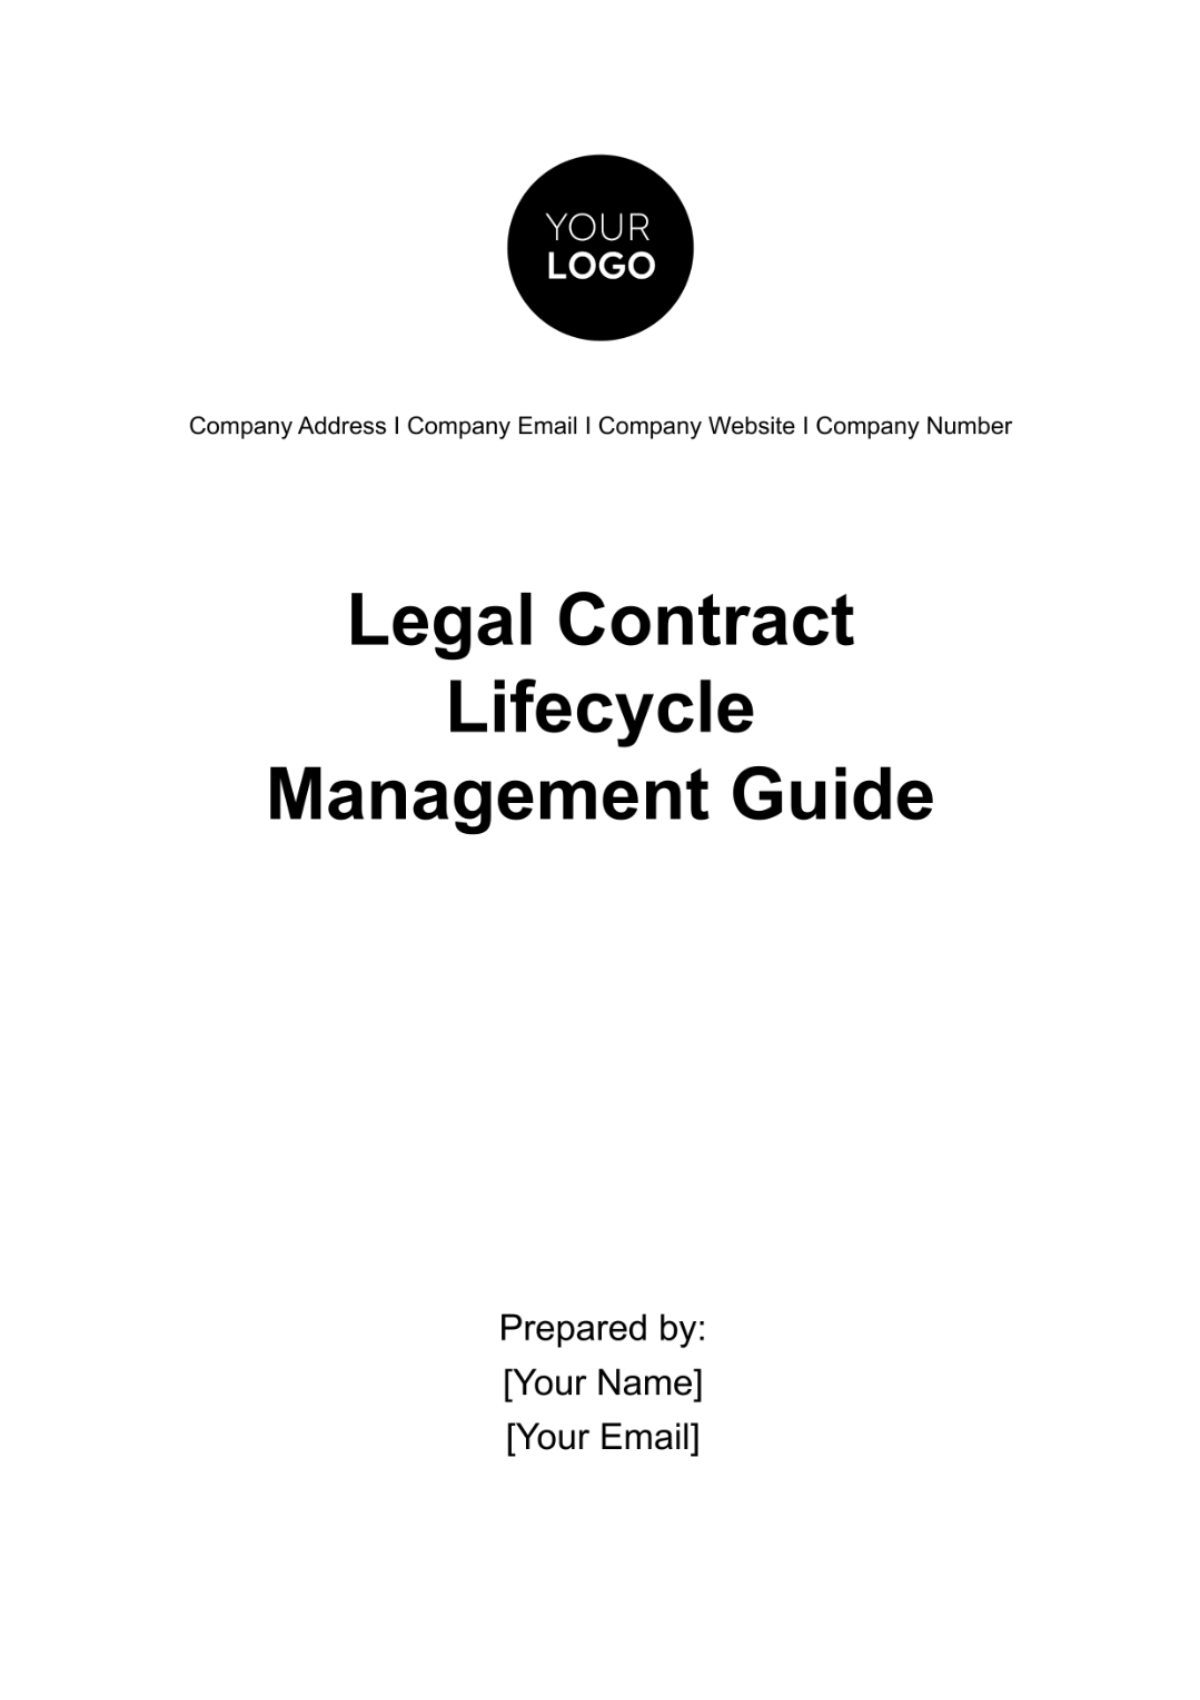 Legal Contract Lifecycle Management Guide Template